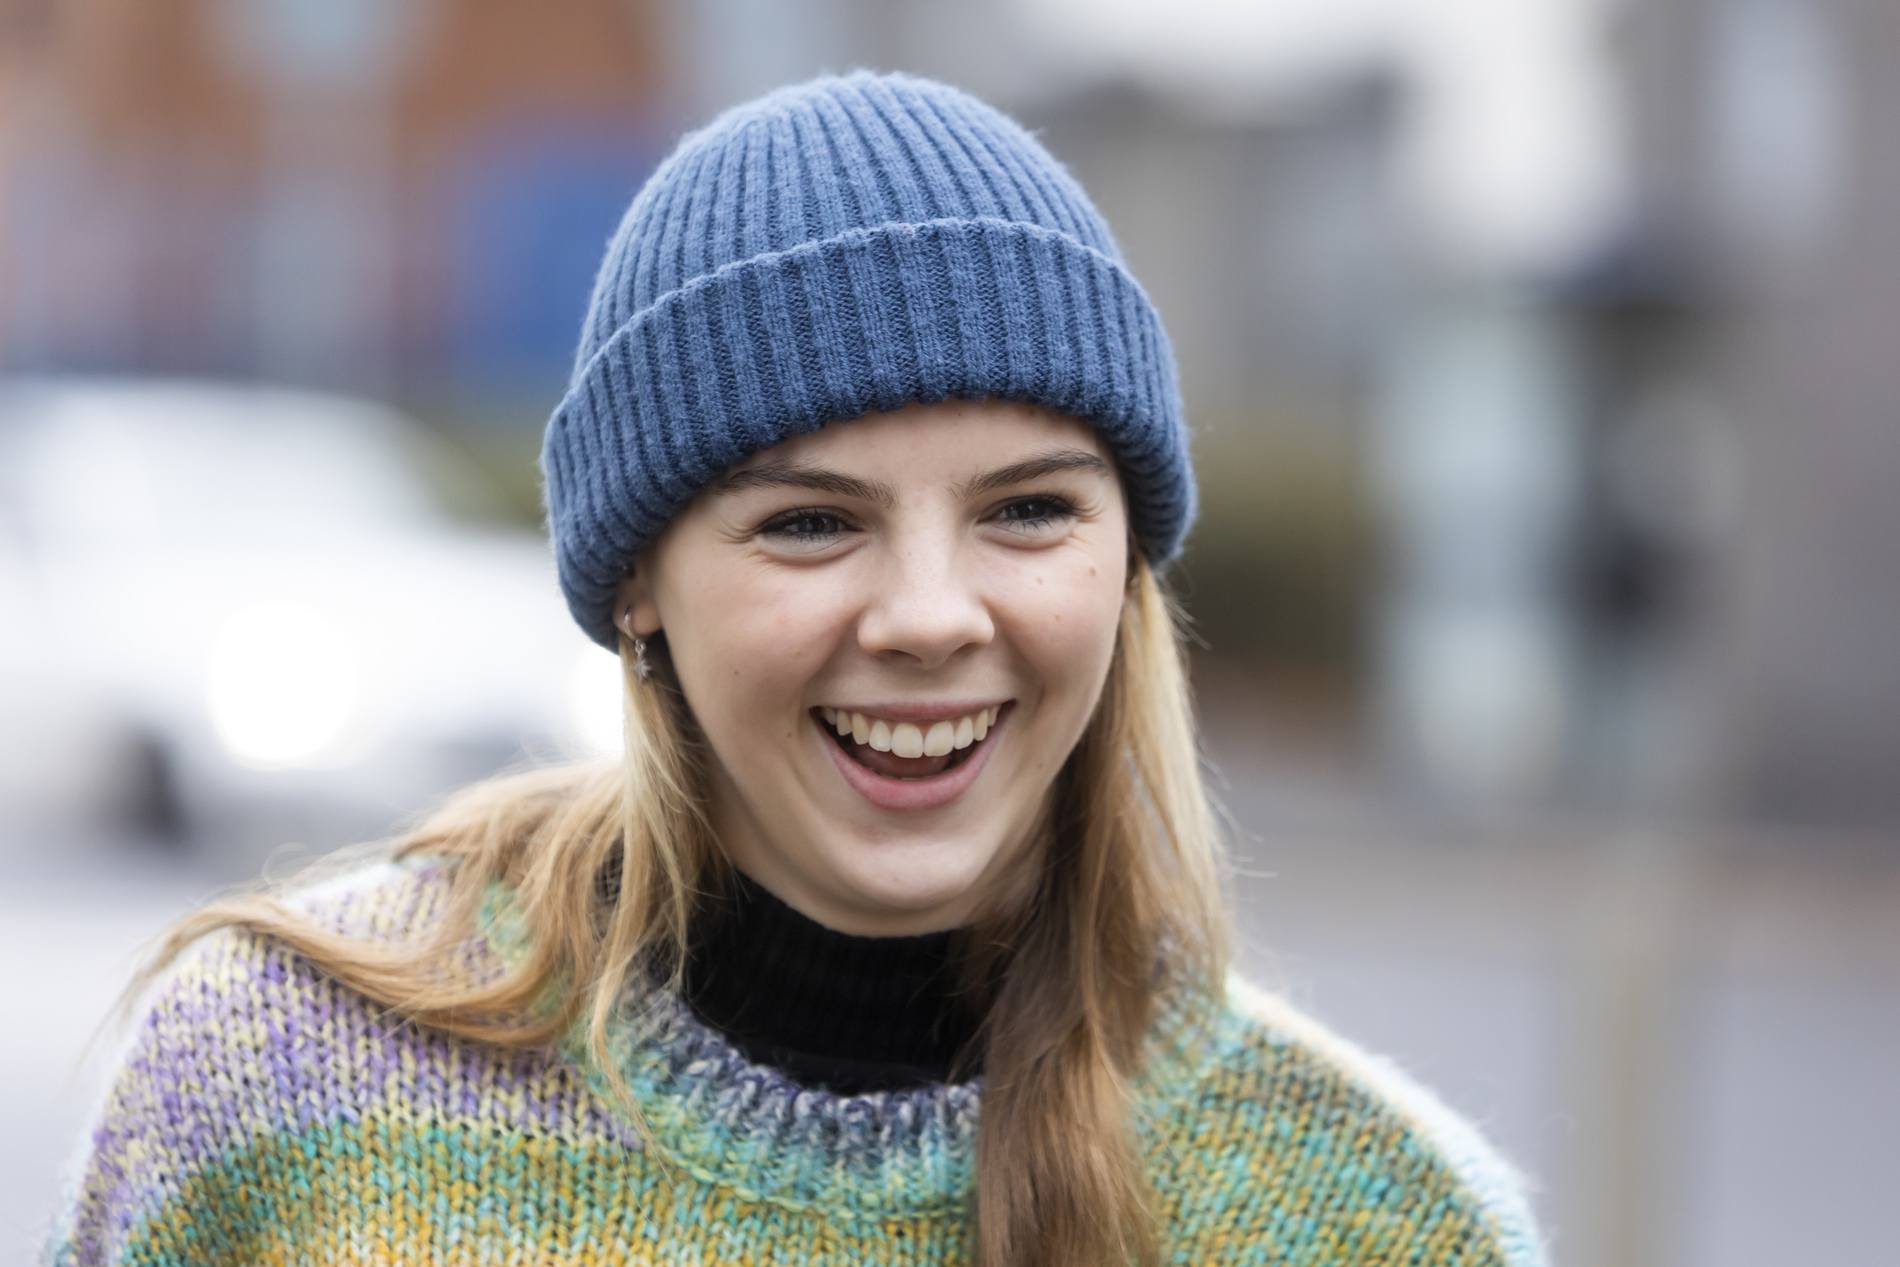 A young woman is smiling. She is thinking about study options for young mums. This is a close-up image.